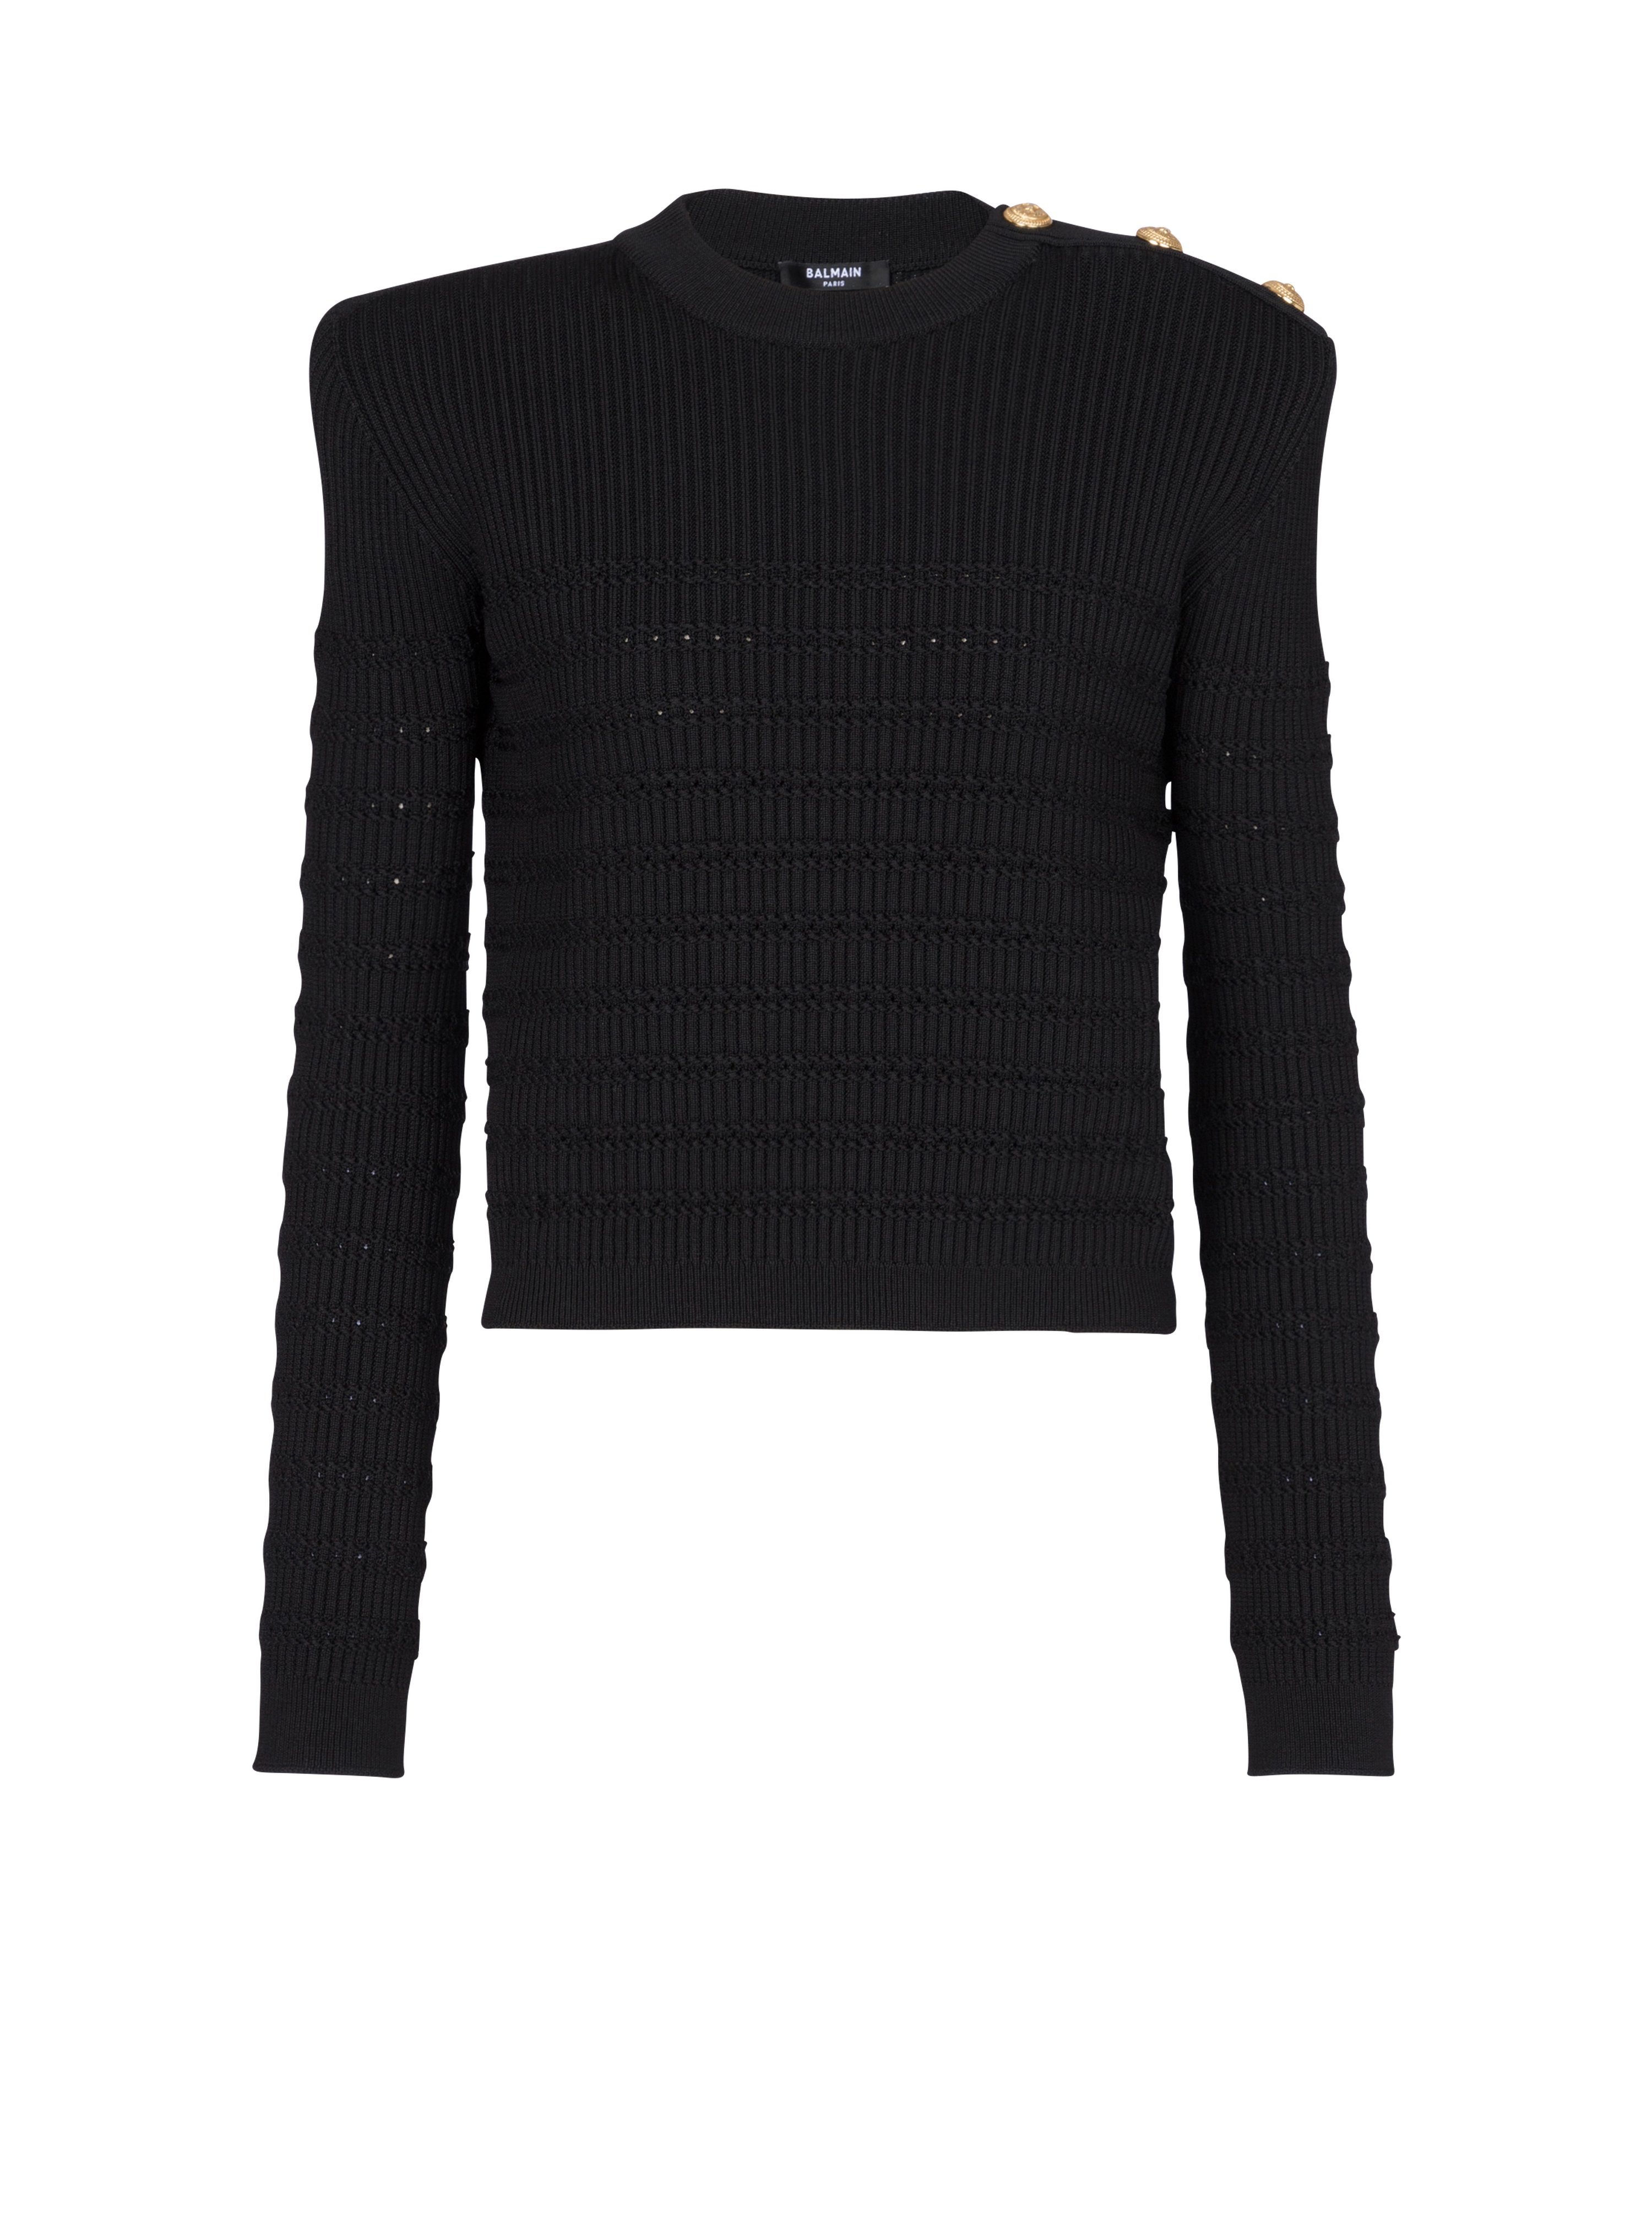 Knit jumper with gold buttons, black